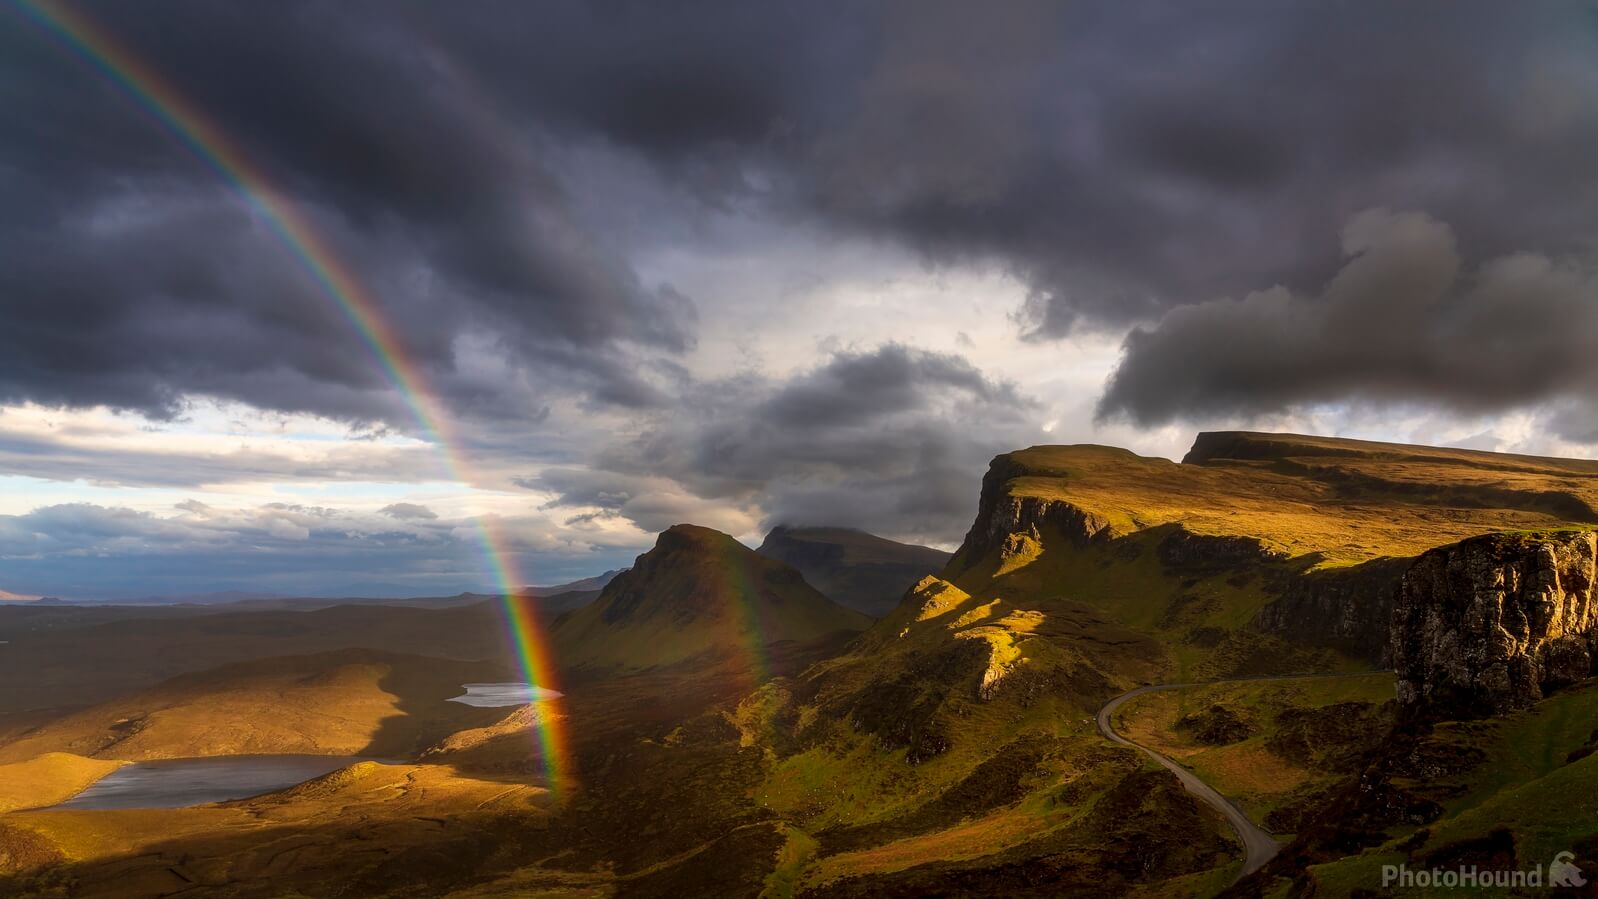 Image of The Quiraing by Doug Stratton